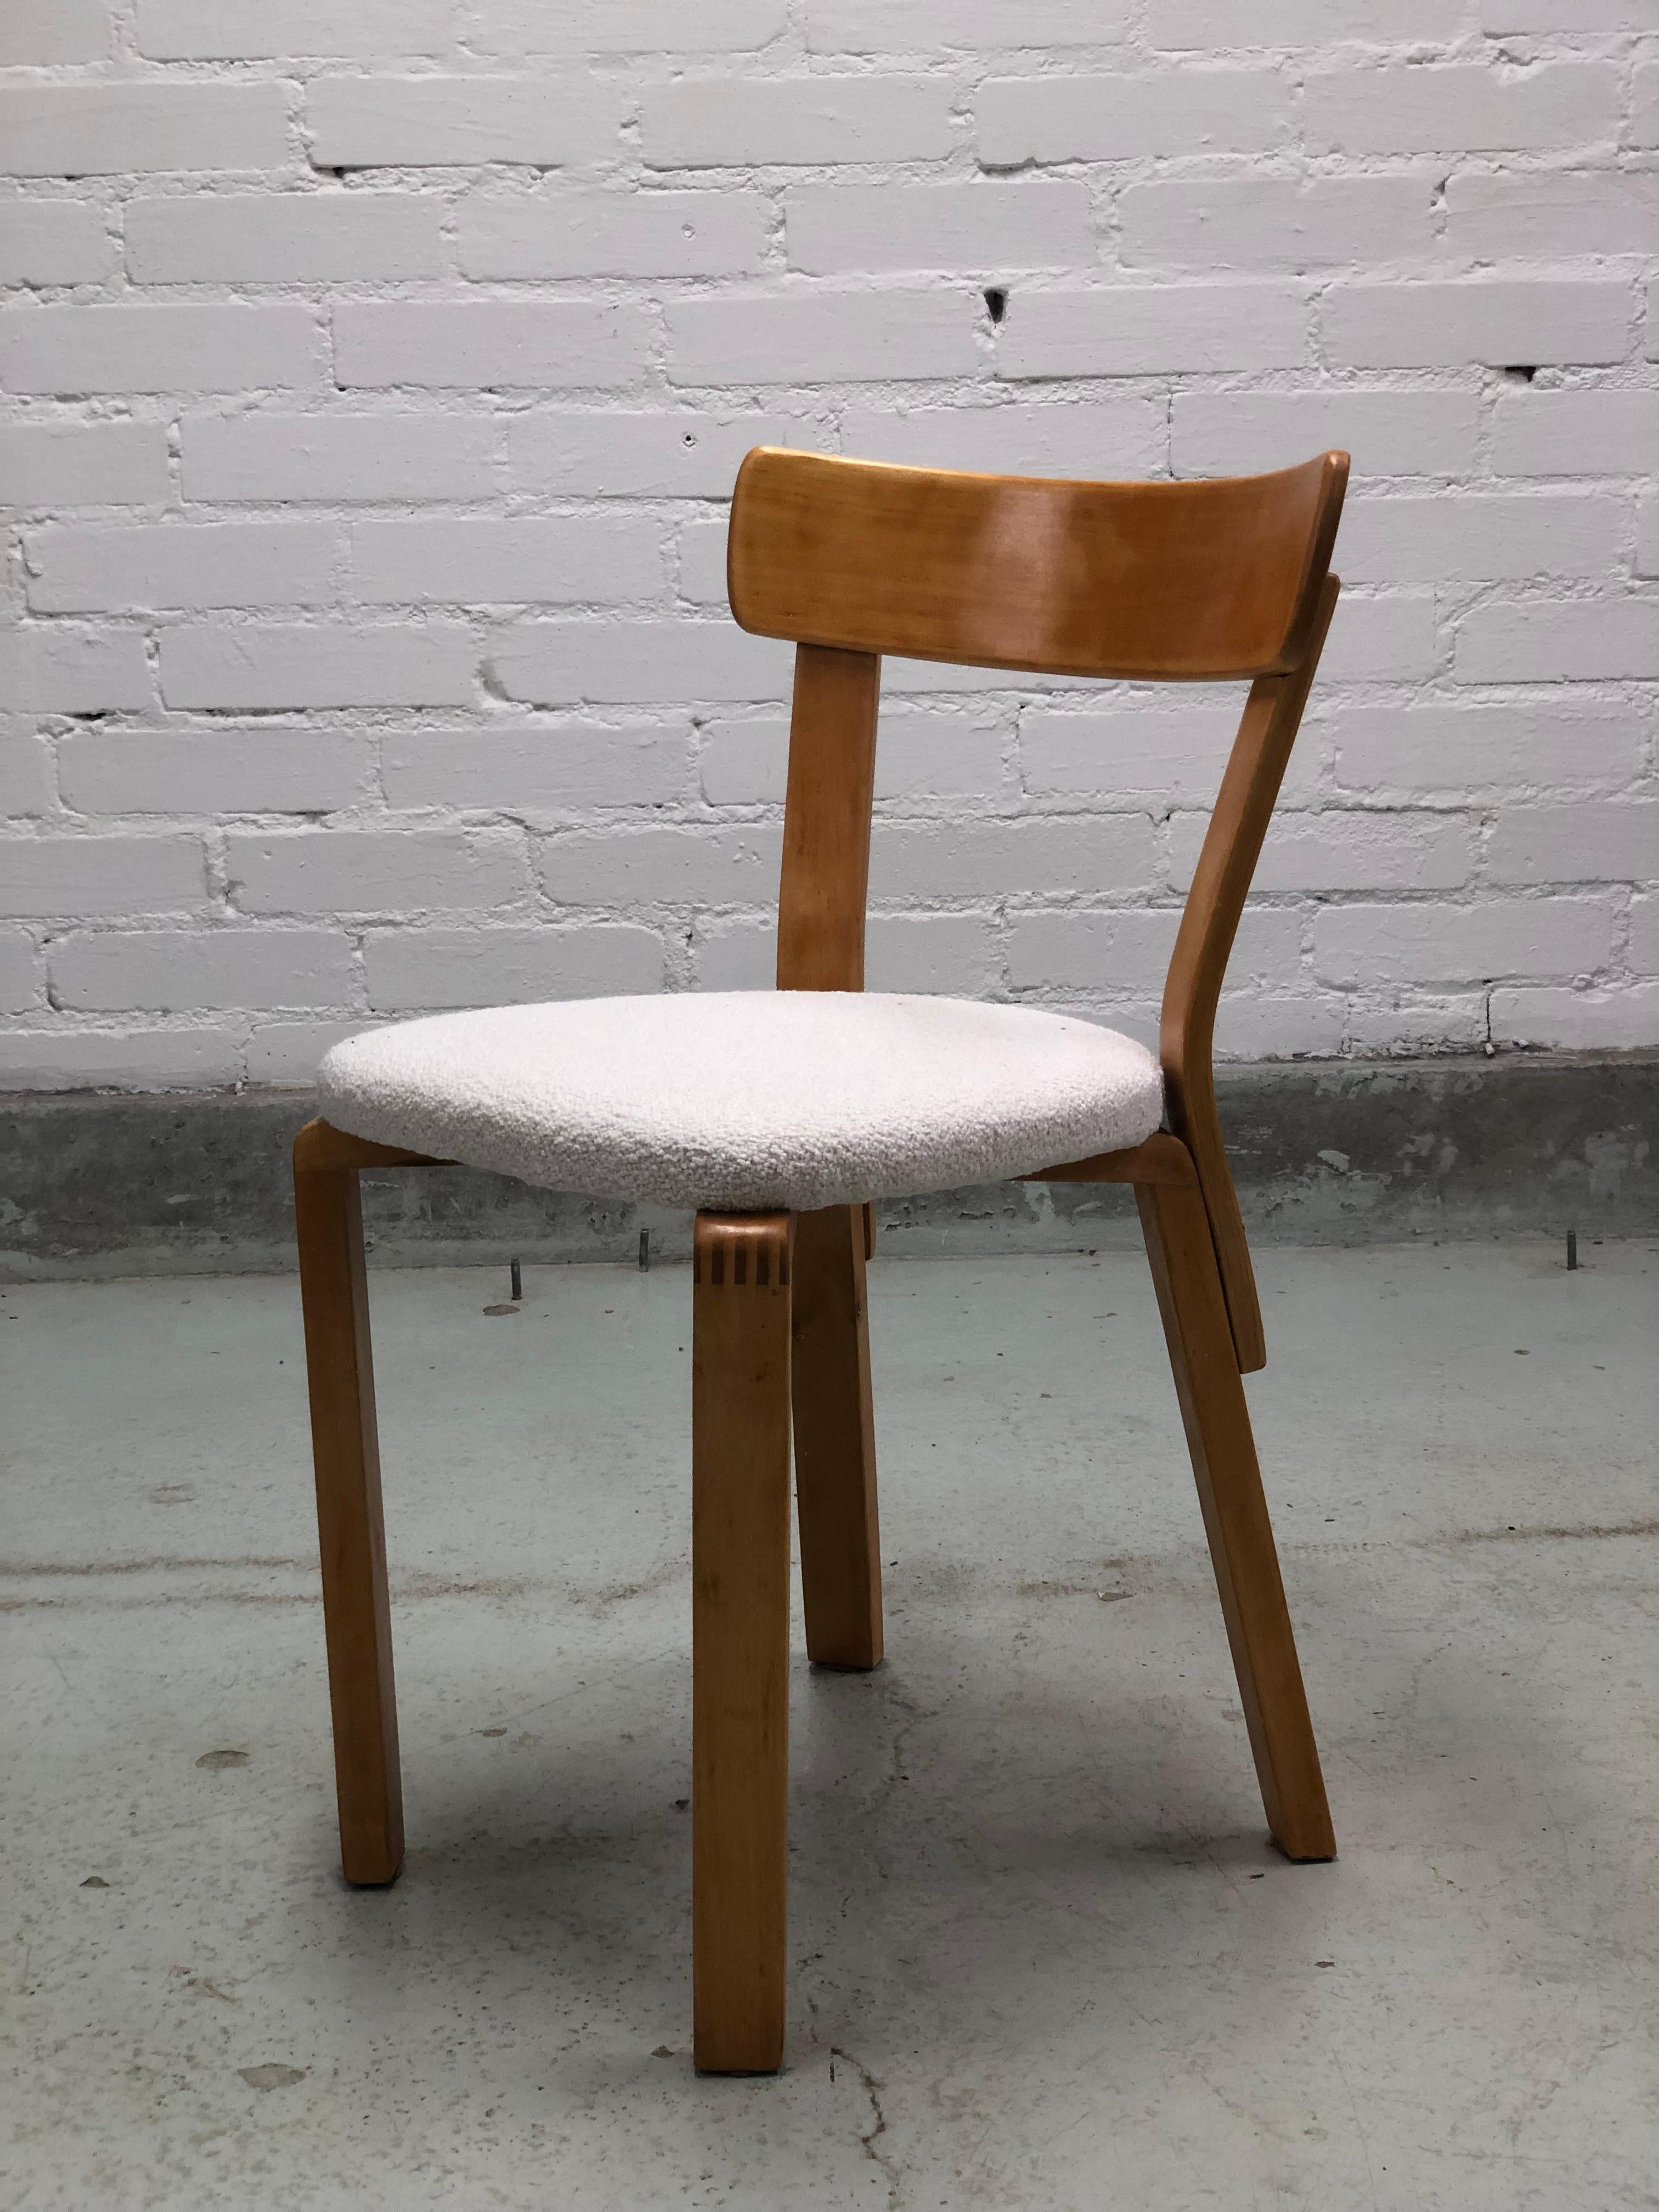 A very rare Alvar Aalto chair model 69, manufactured during the 2nd World war years in the 1940s. The iconic L-leg is different in these pieces compared to the normal. As a result of the war, Finland had a shortage of resources including glue, which